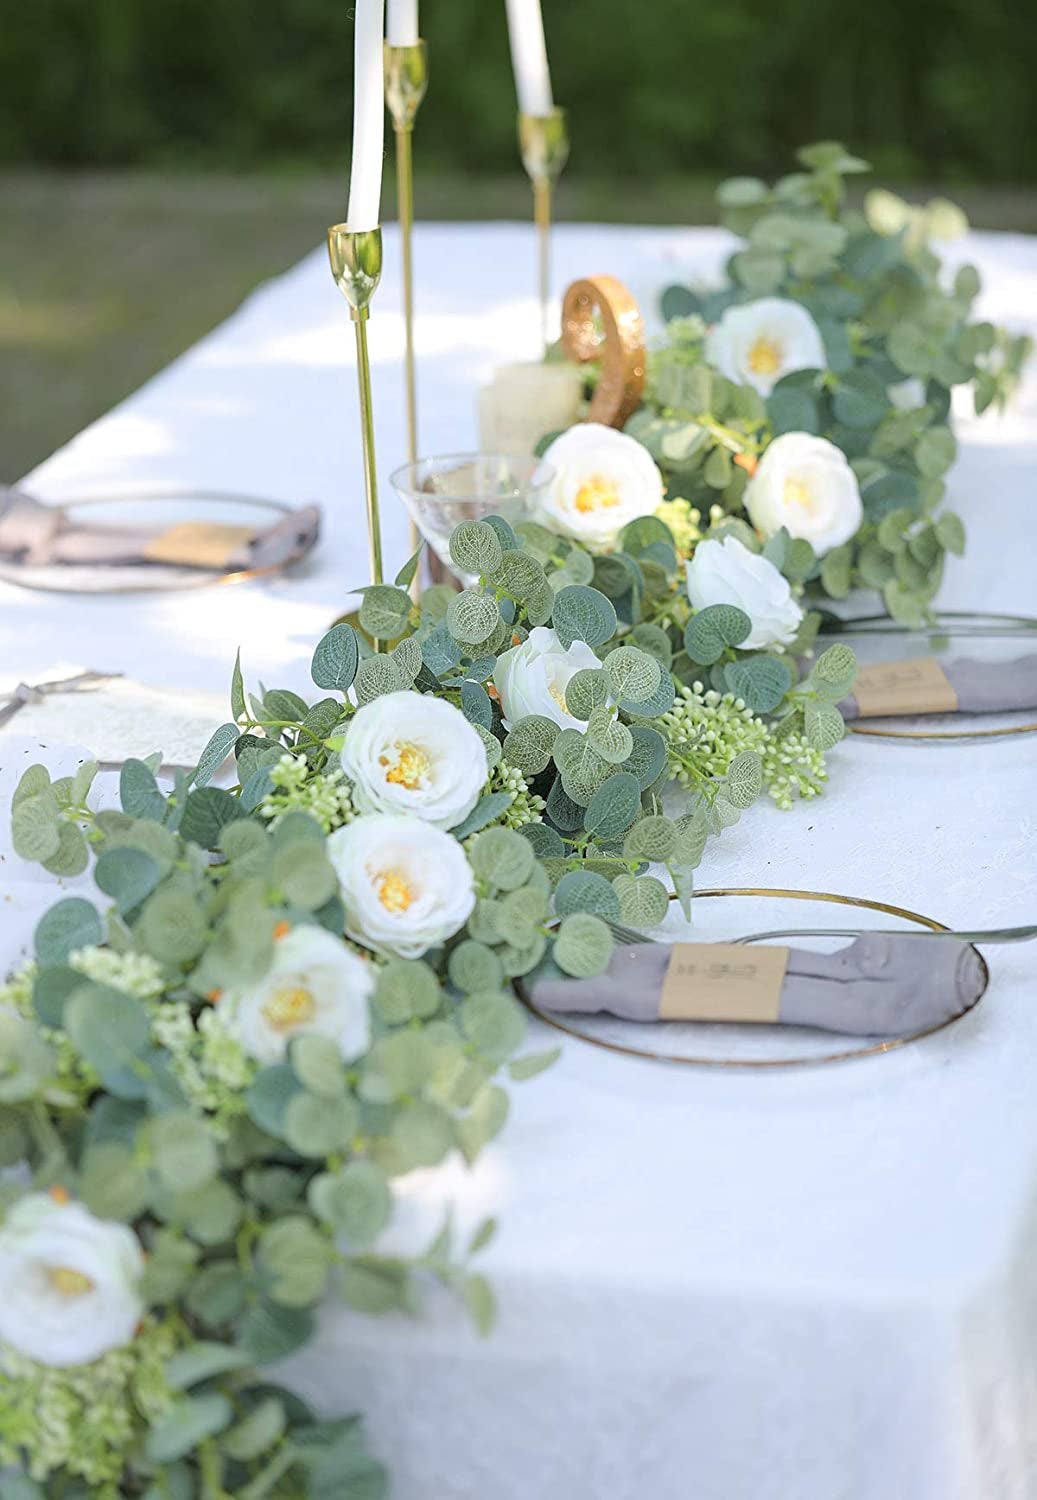 Green and white eucalyptus garland set up on a white table outside